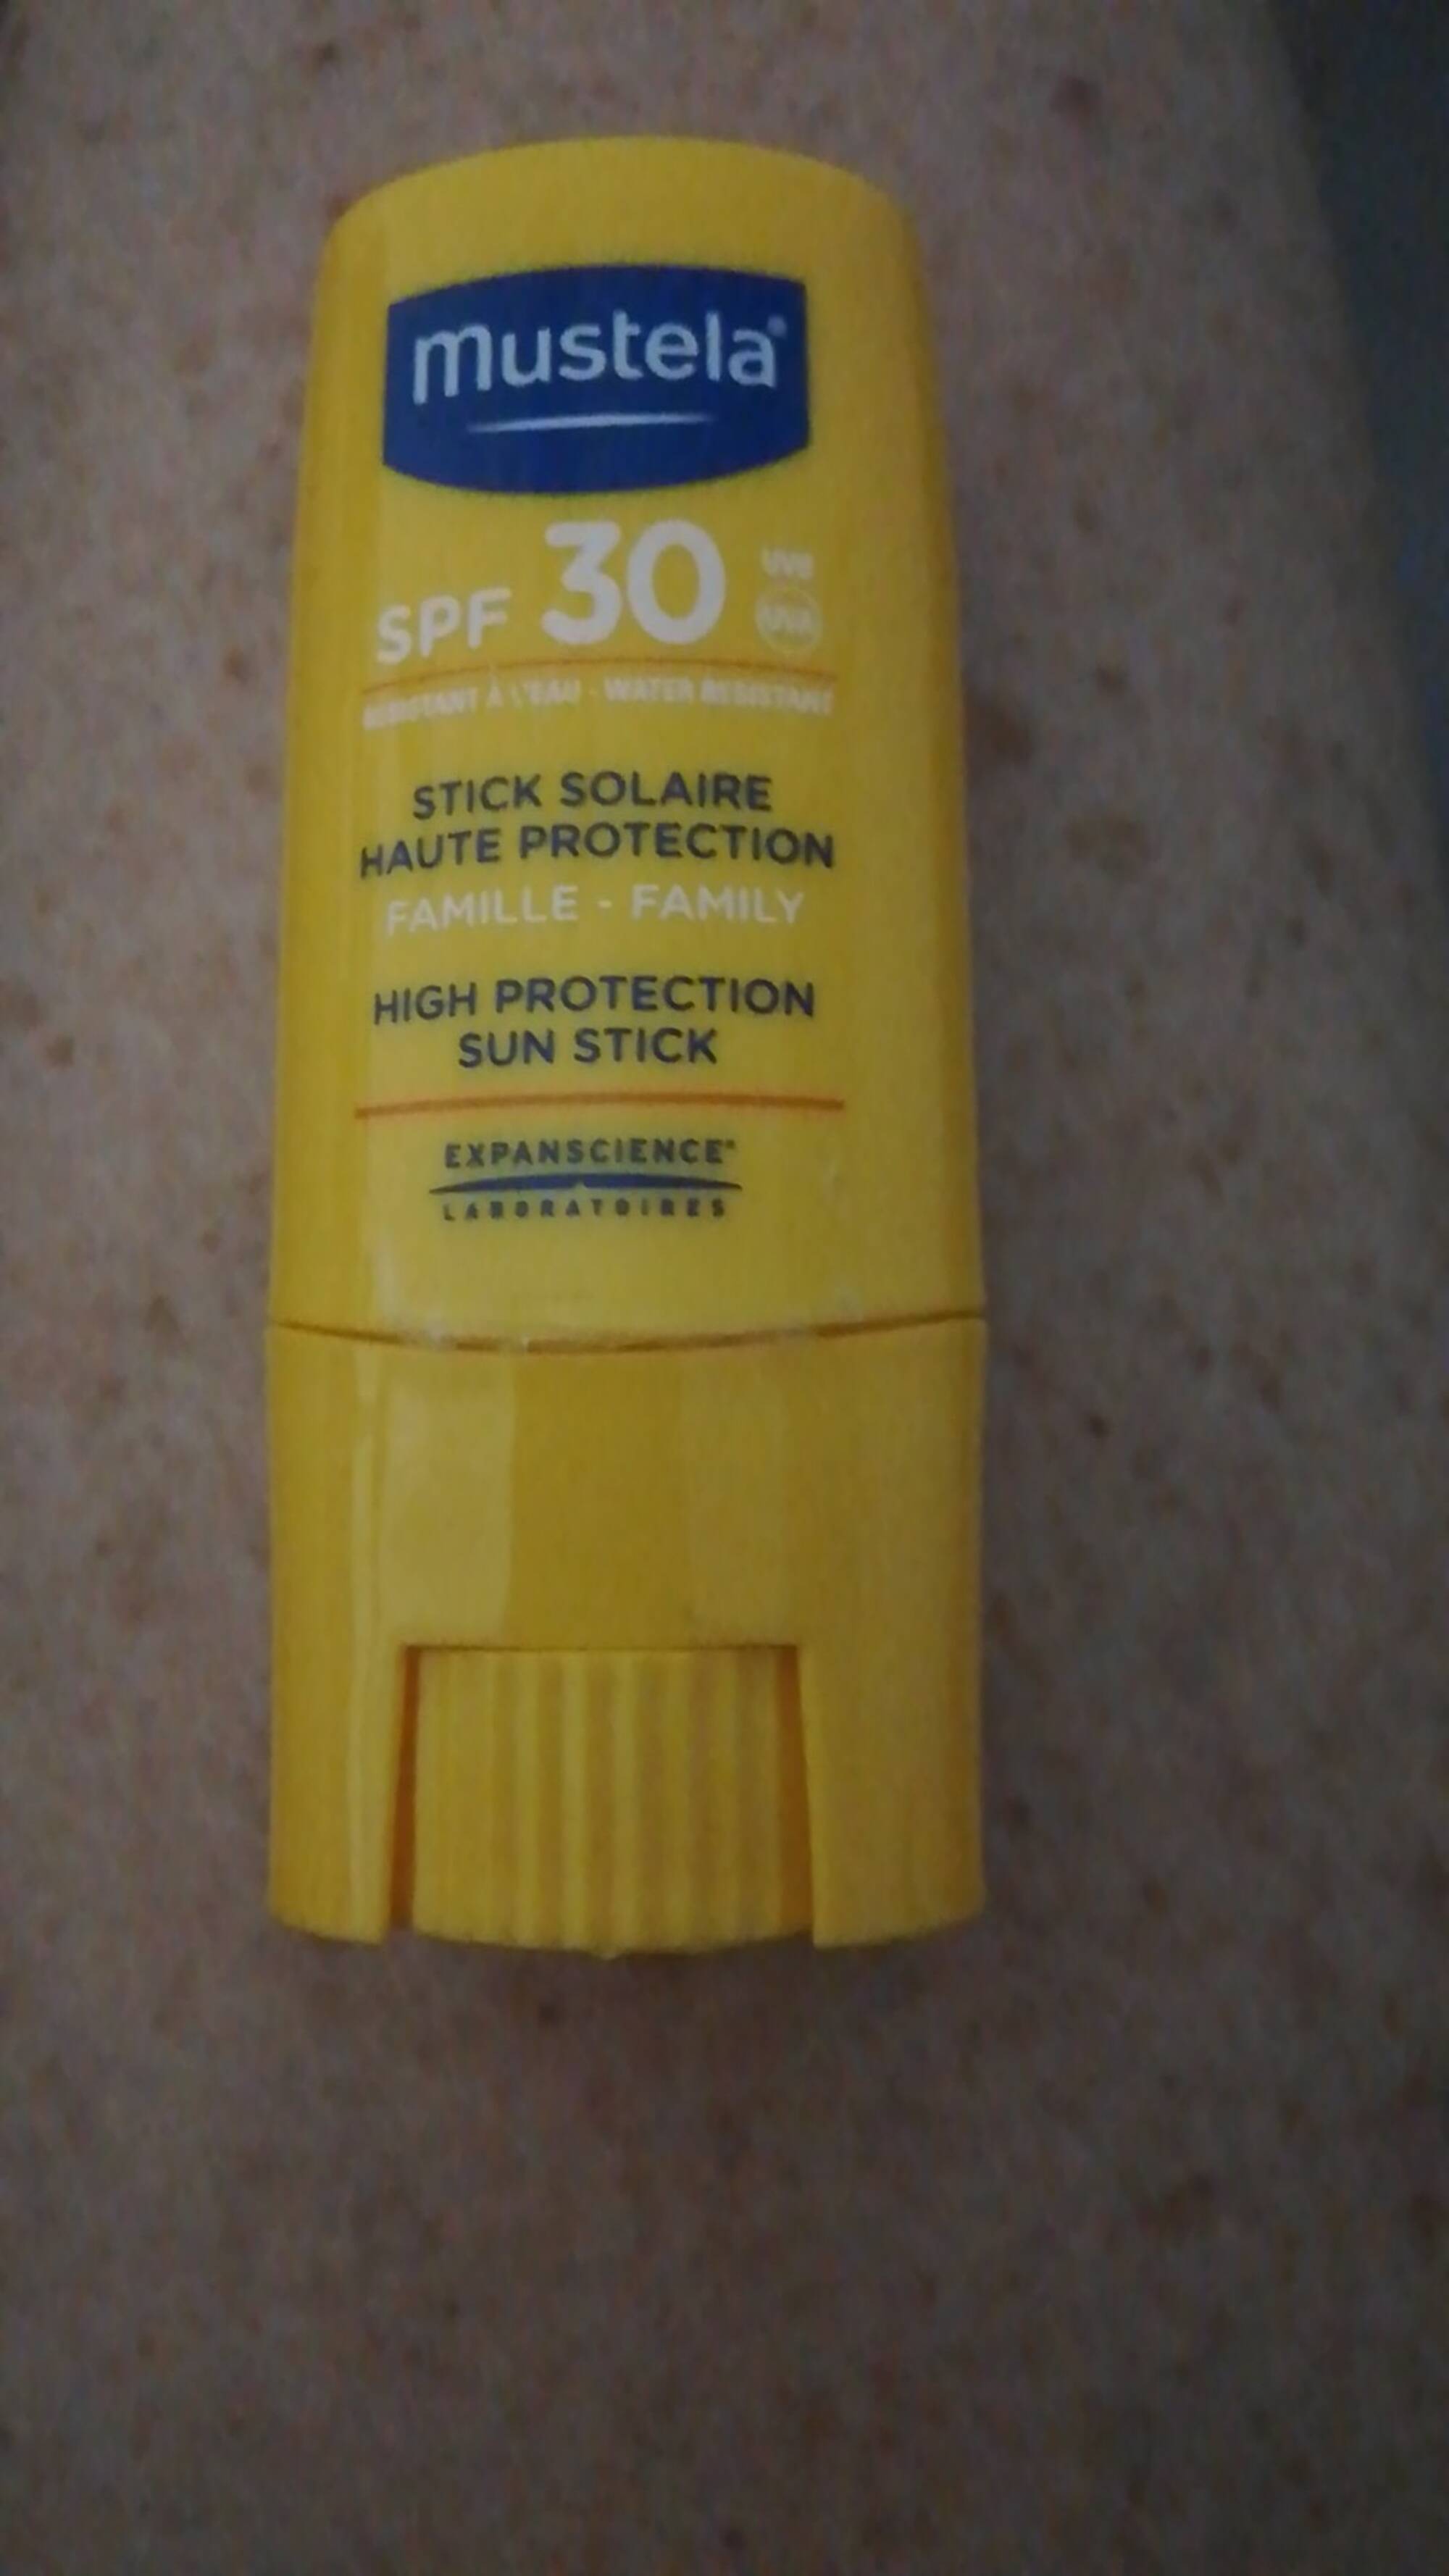 MUSTELA - Stick solaire haute protection SPF 30